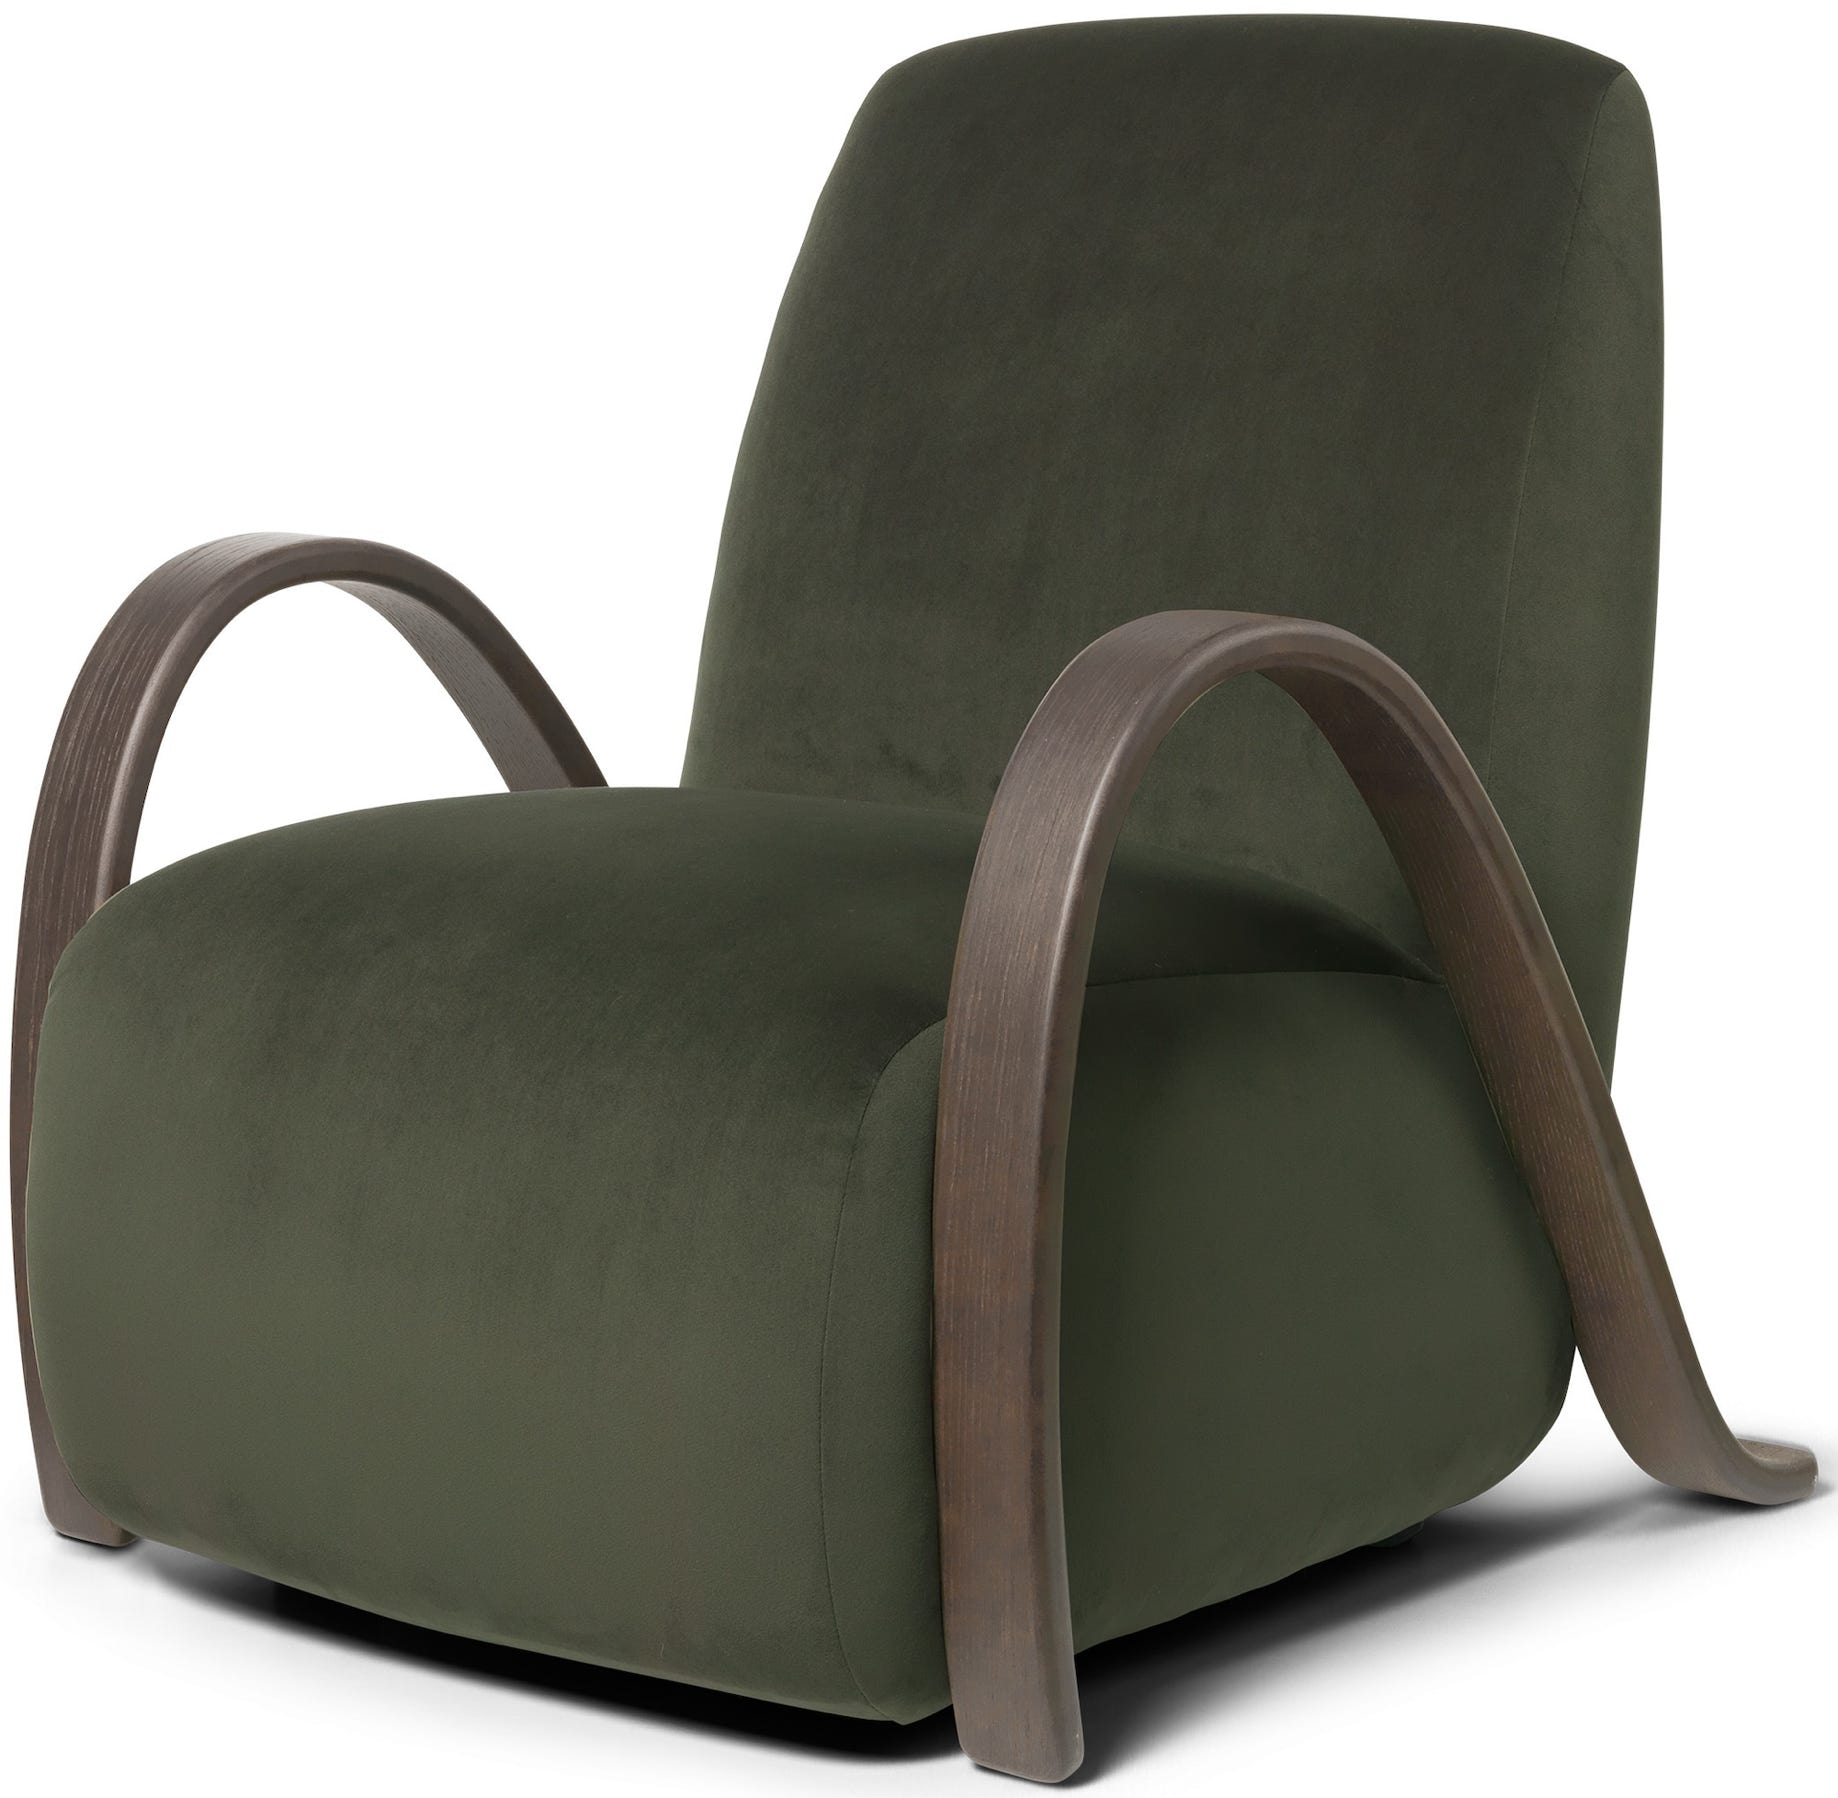 Buur Lounge Chair Ferm Living & Says Who